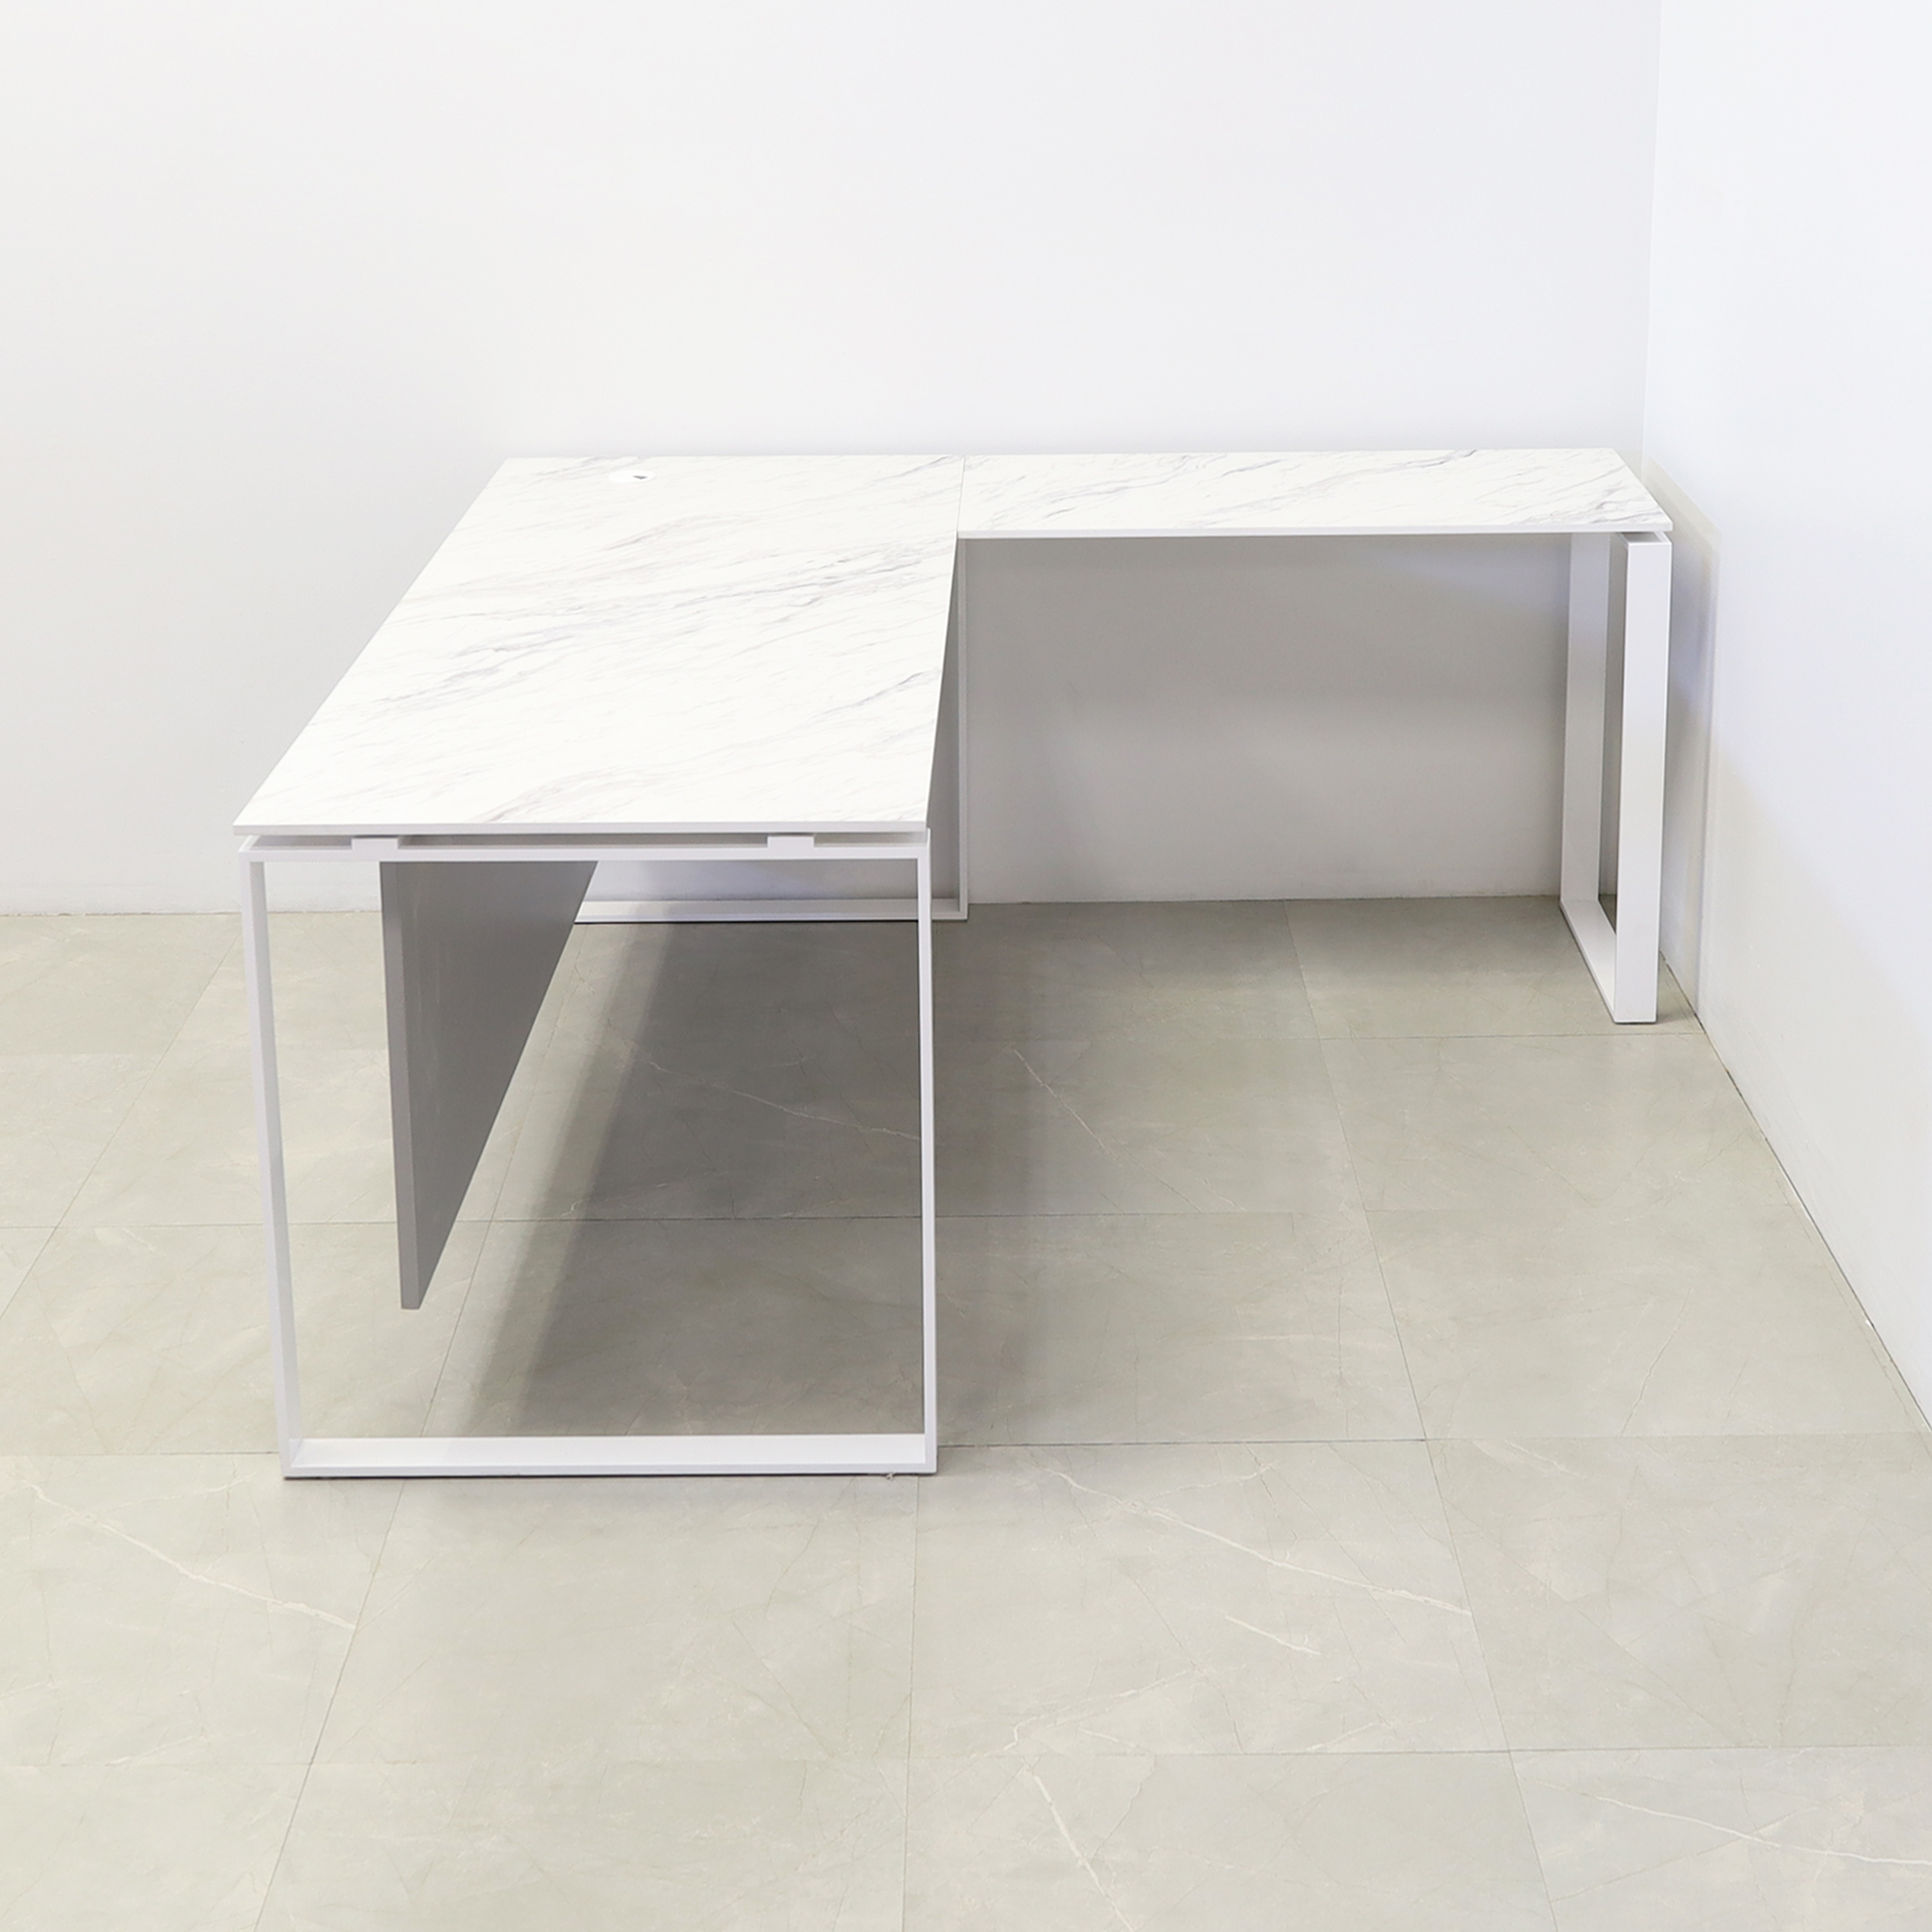 Aspen L-Shape Executive Desk With Engineered Stone Top in calcutta blanc top, folkstone gray privacy panel and white metal legs shown here.